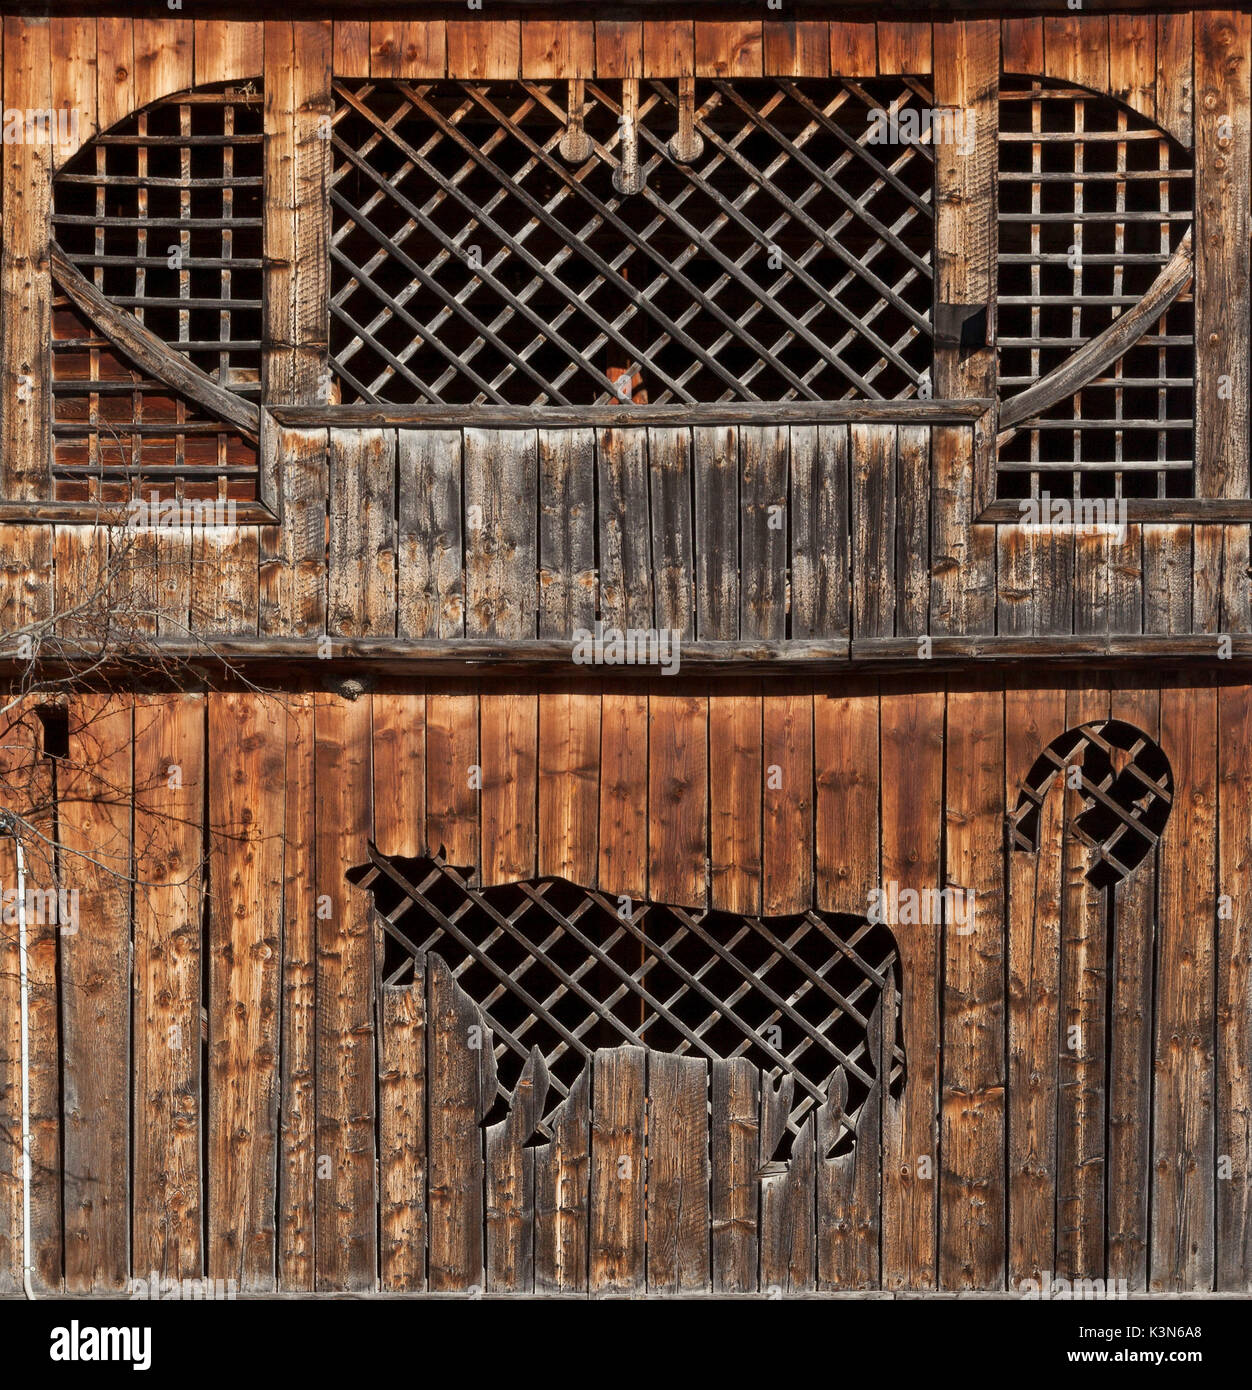 Europe, Italy, Veneto, Belluno, Zoldo. Detail on the facade of a characteristic wooden barn in Dolomites Stock Photo